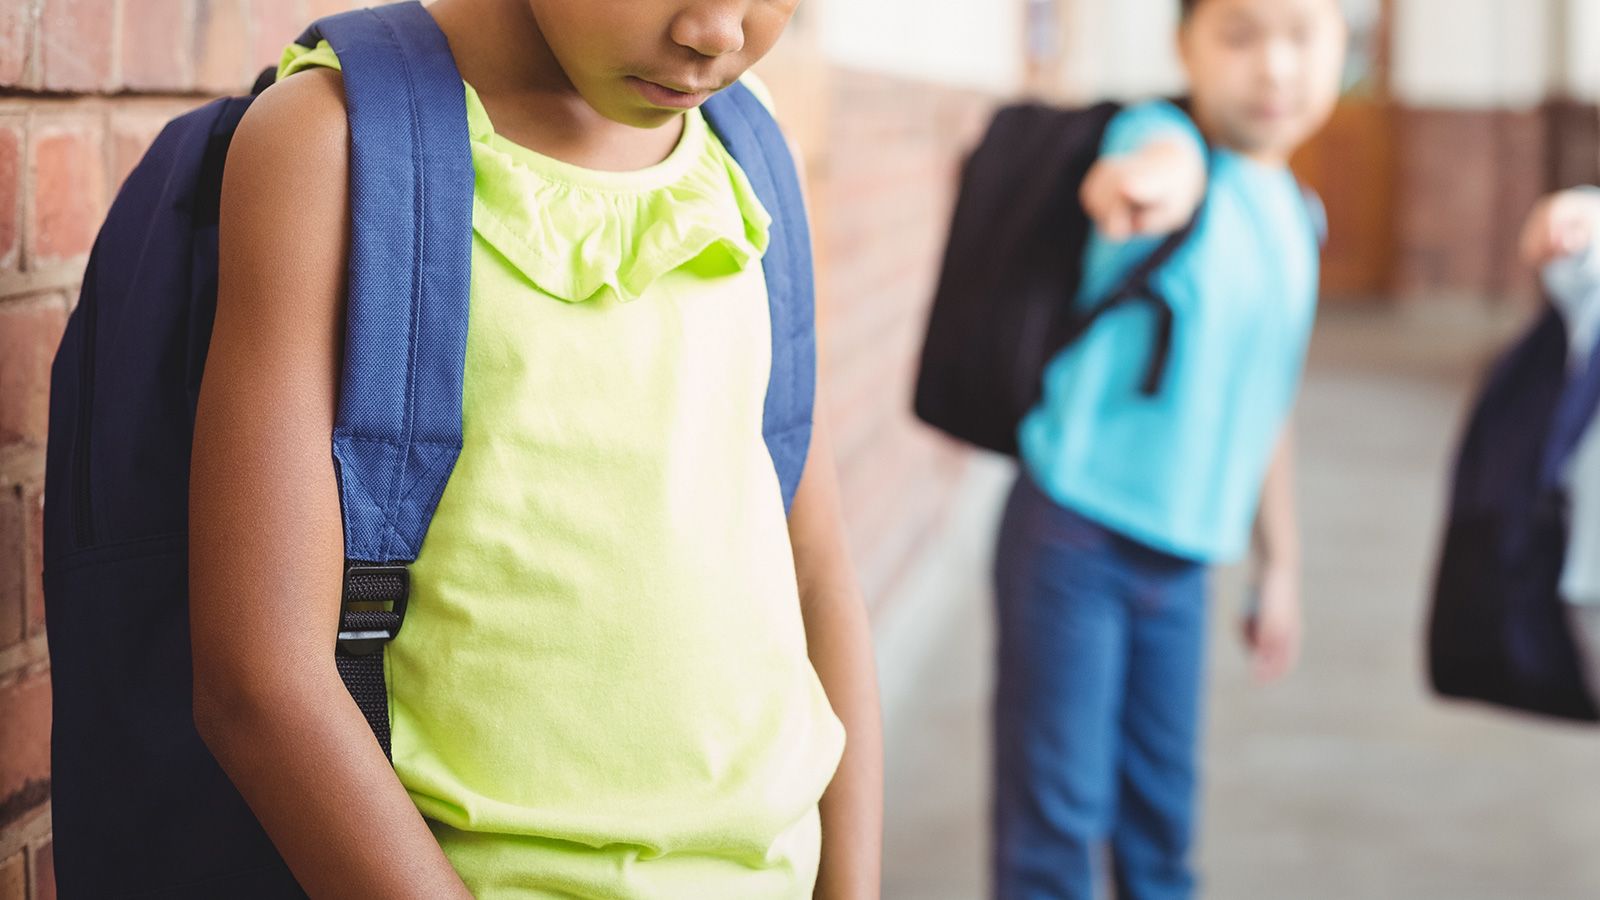 Bullying at school: Signs your child is being bullied - Children's Health